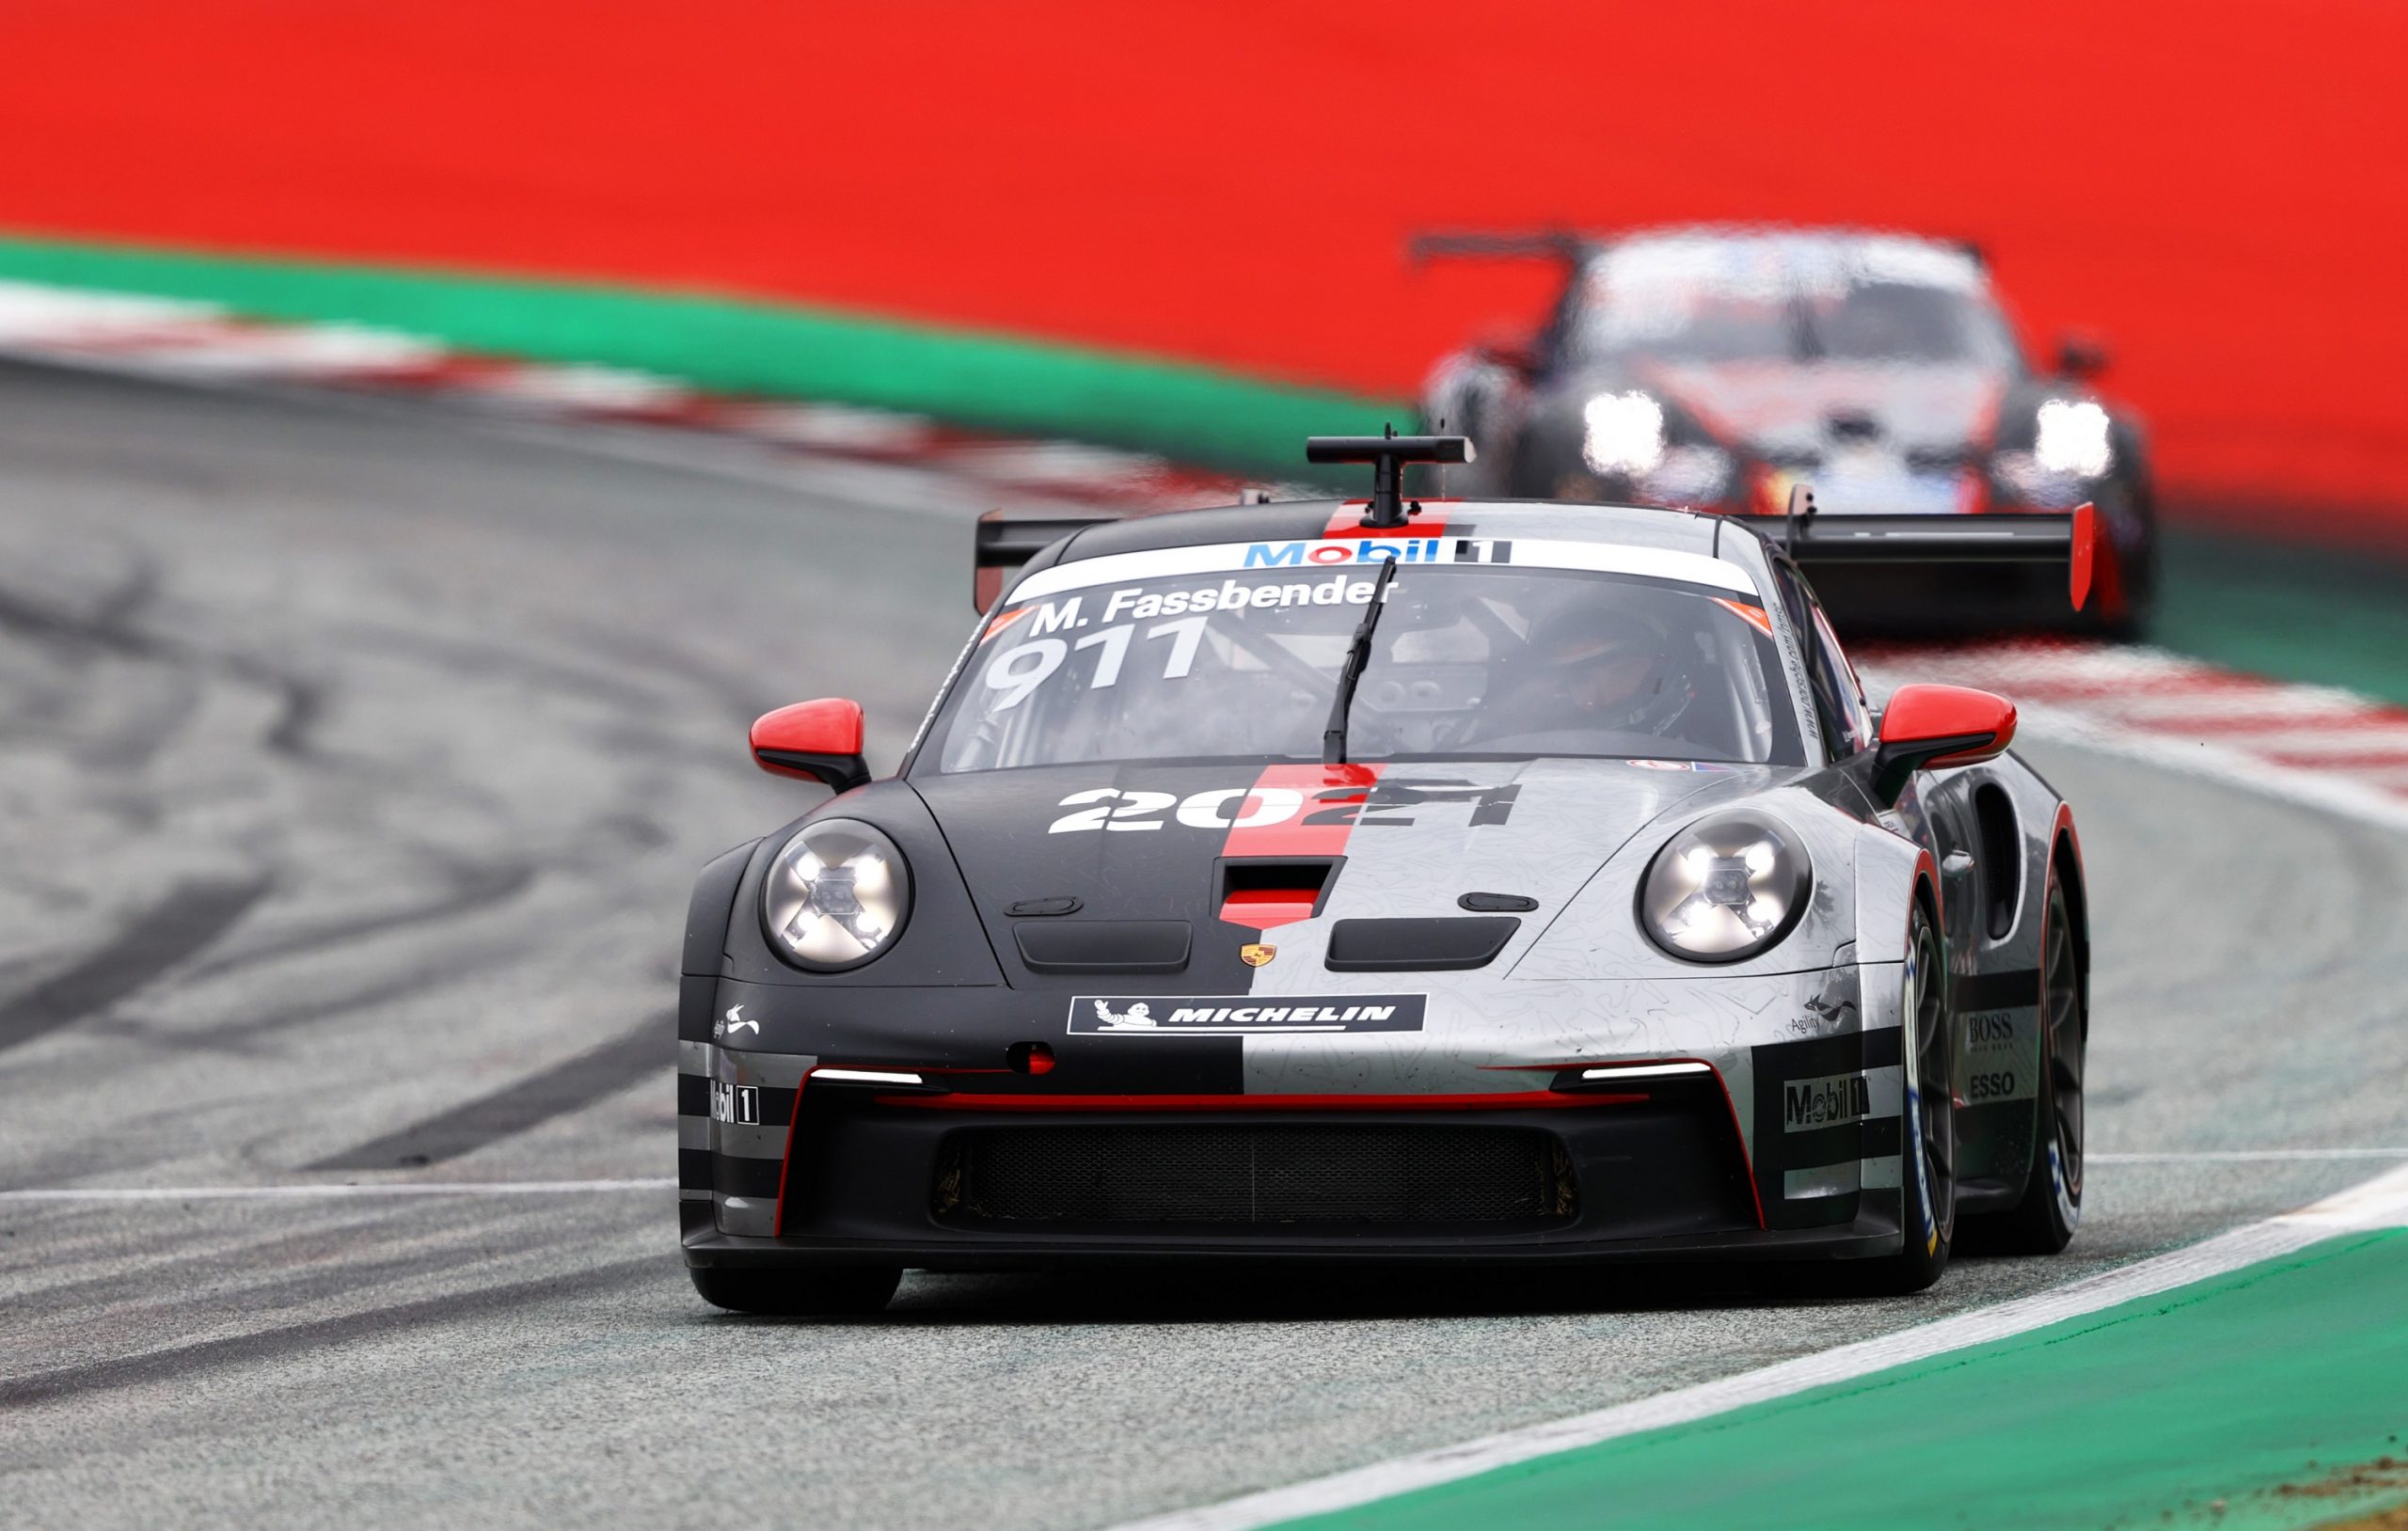 Michael Fassbender's grey and red 24 Hours of Le Mans Porsche 911 at the Red Bull ring in July